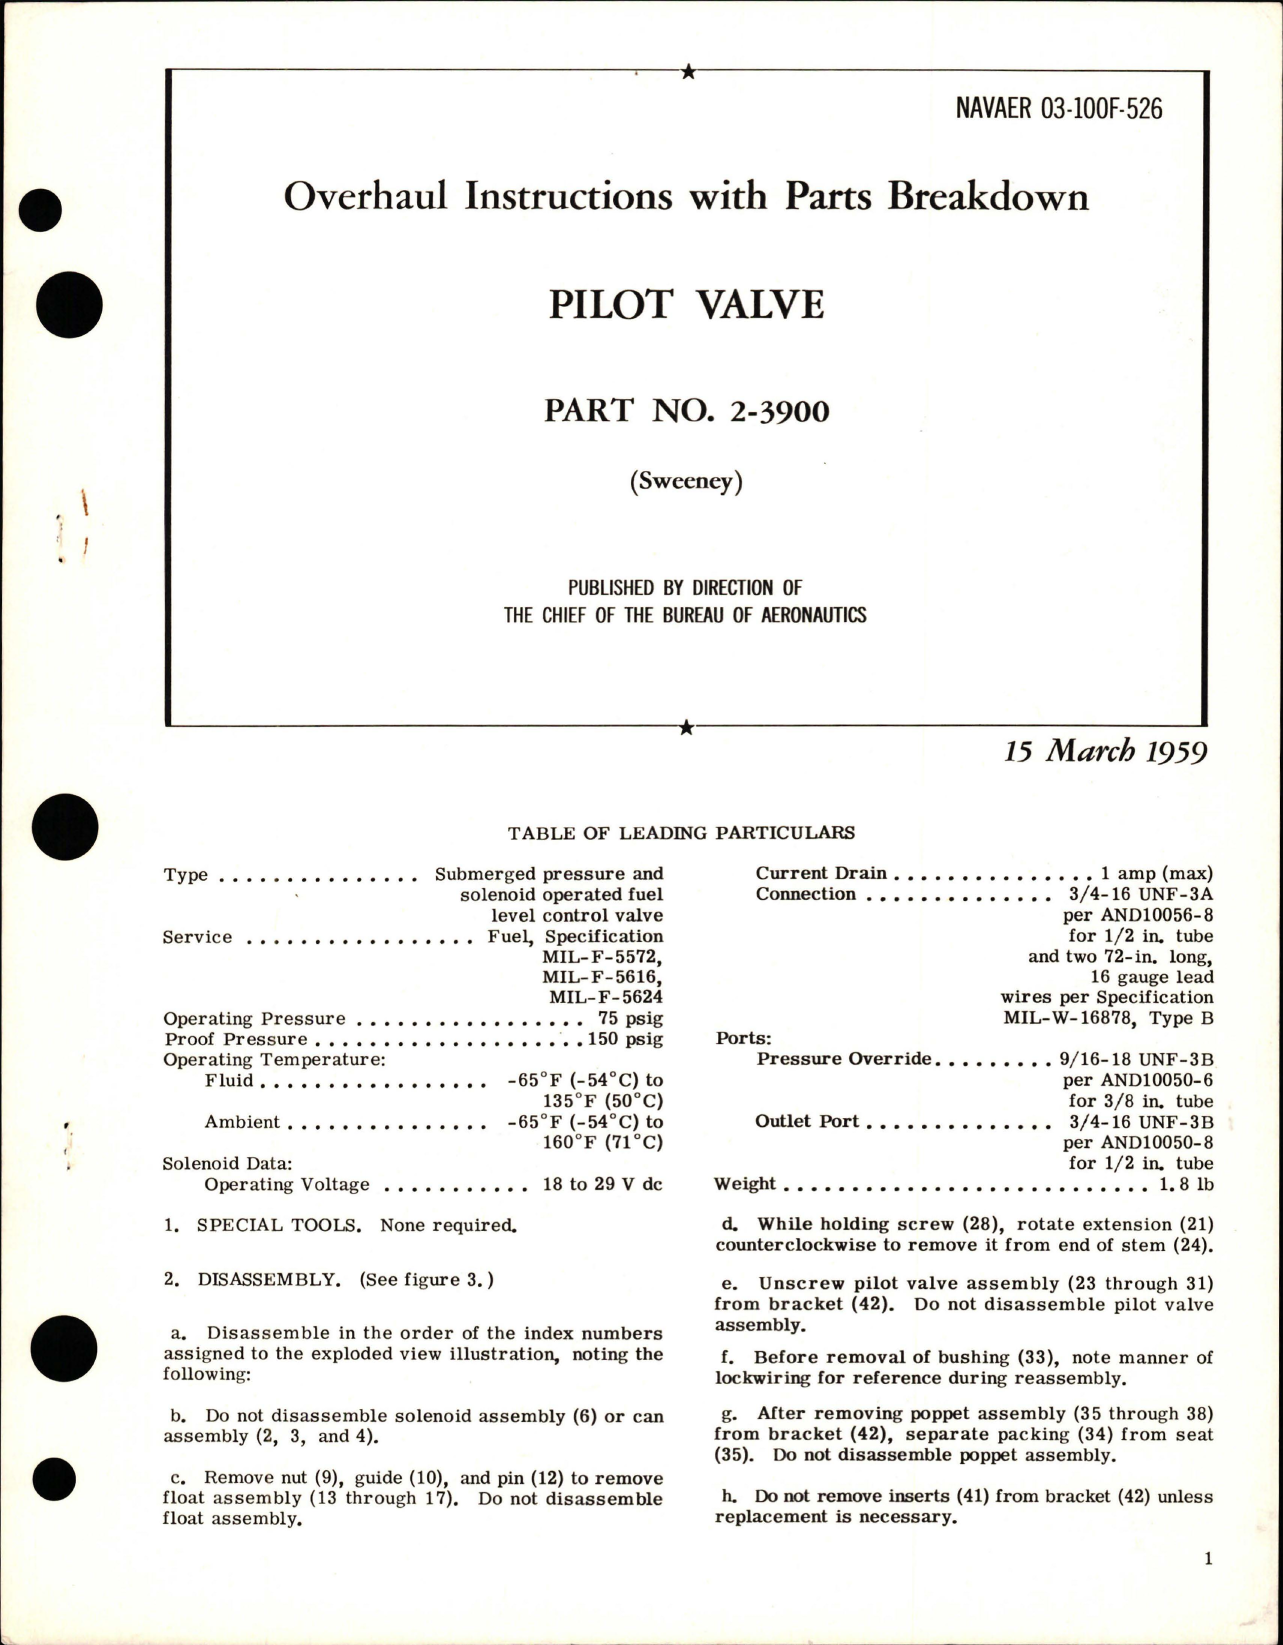 Sample page 1 from AirCorps Library document: Overhaul Instructions with Parts Breakdown for Pilot Valve - Part 2-3900 